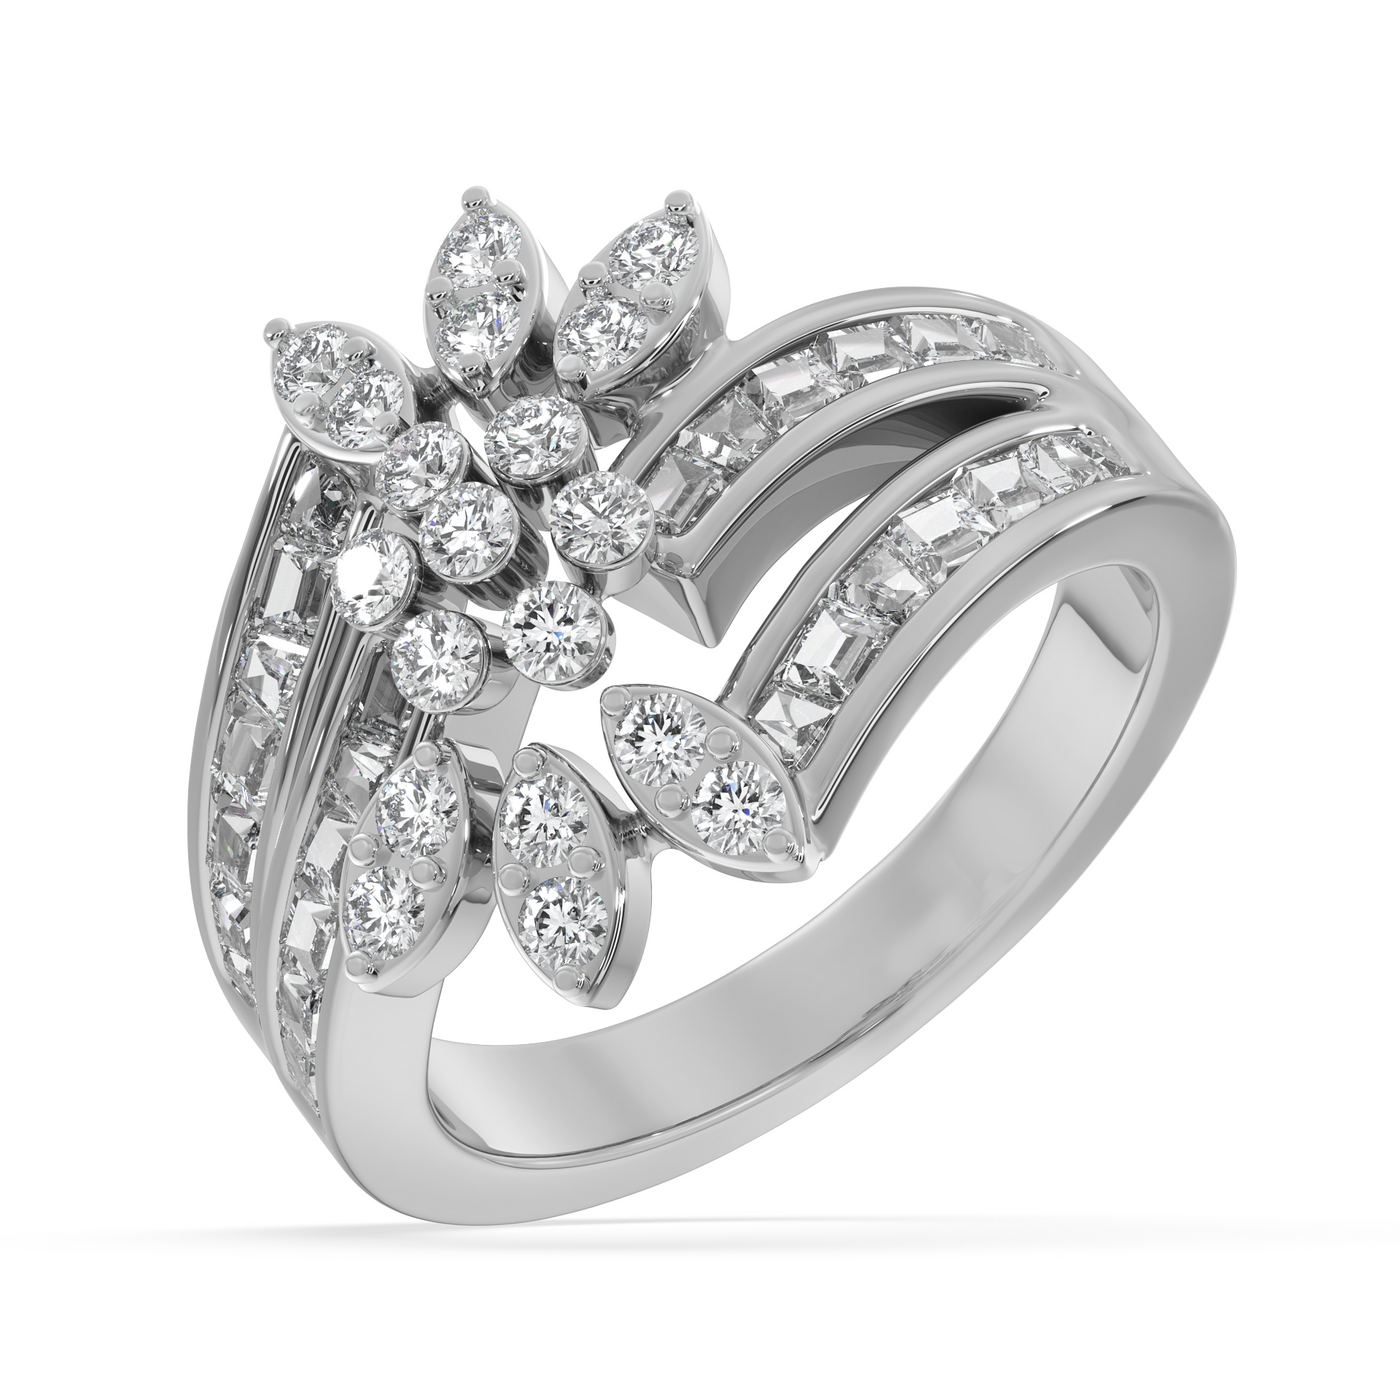 SY Women's Ring in Platinum, Petal Perfection